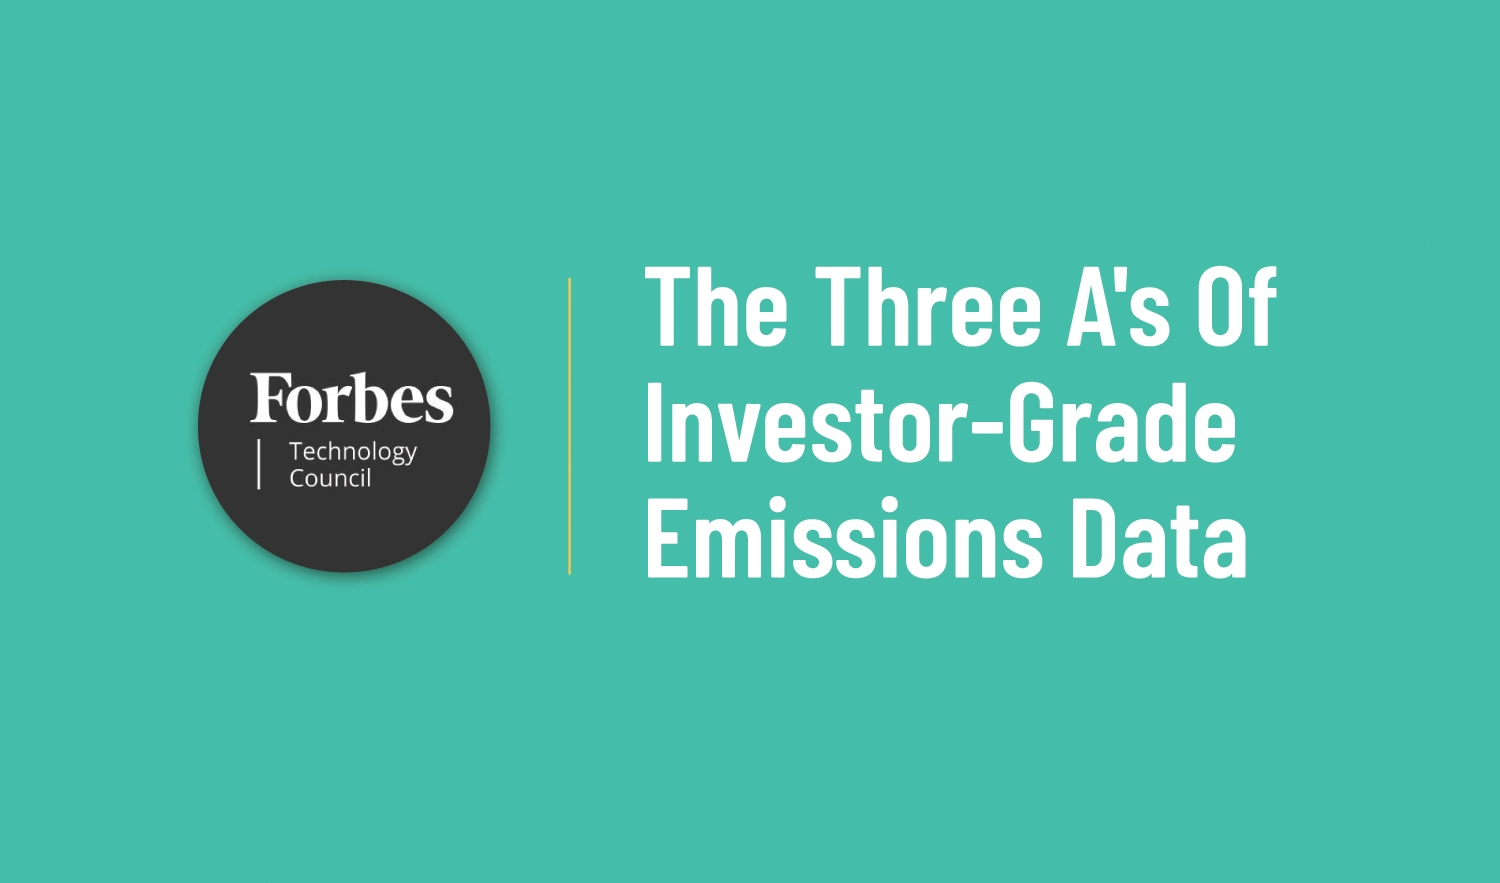 The Three As of Investor-Grade Emissions Data